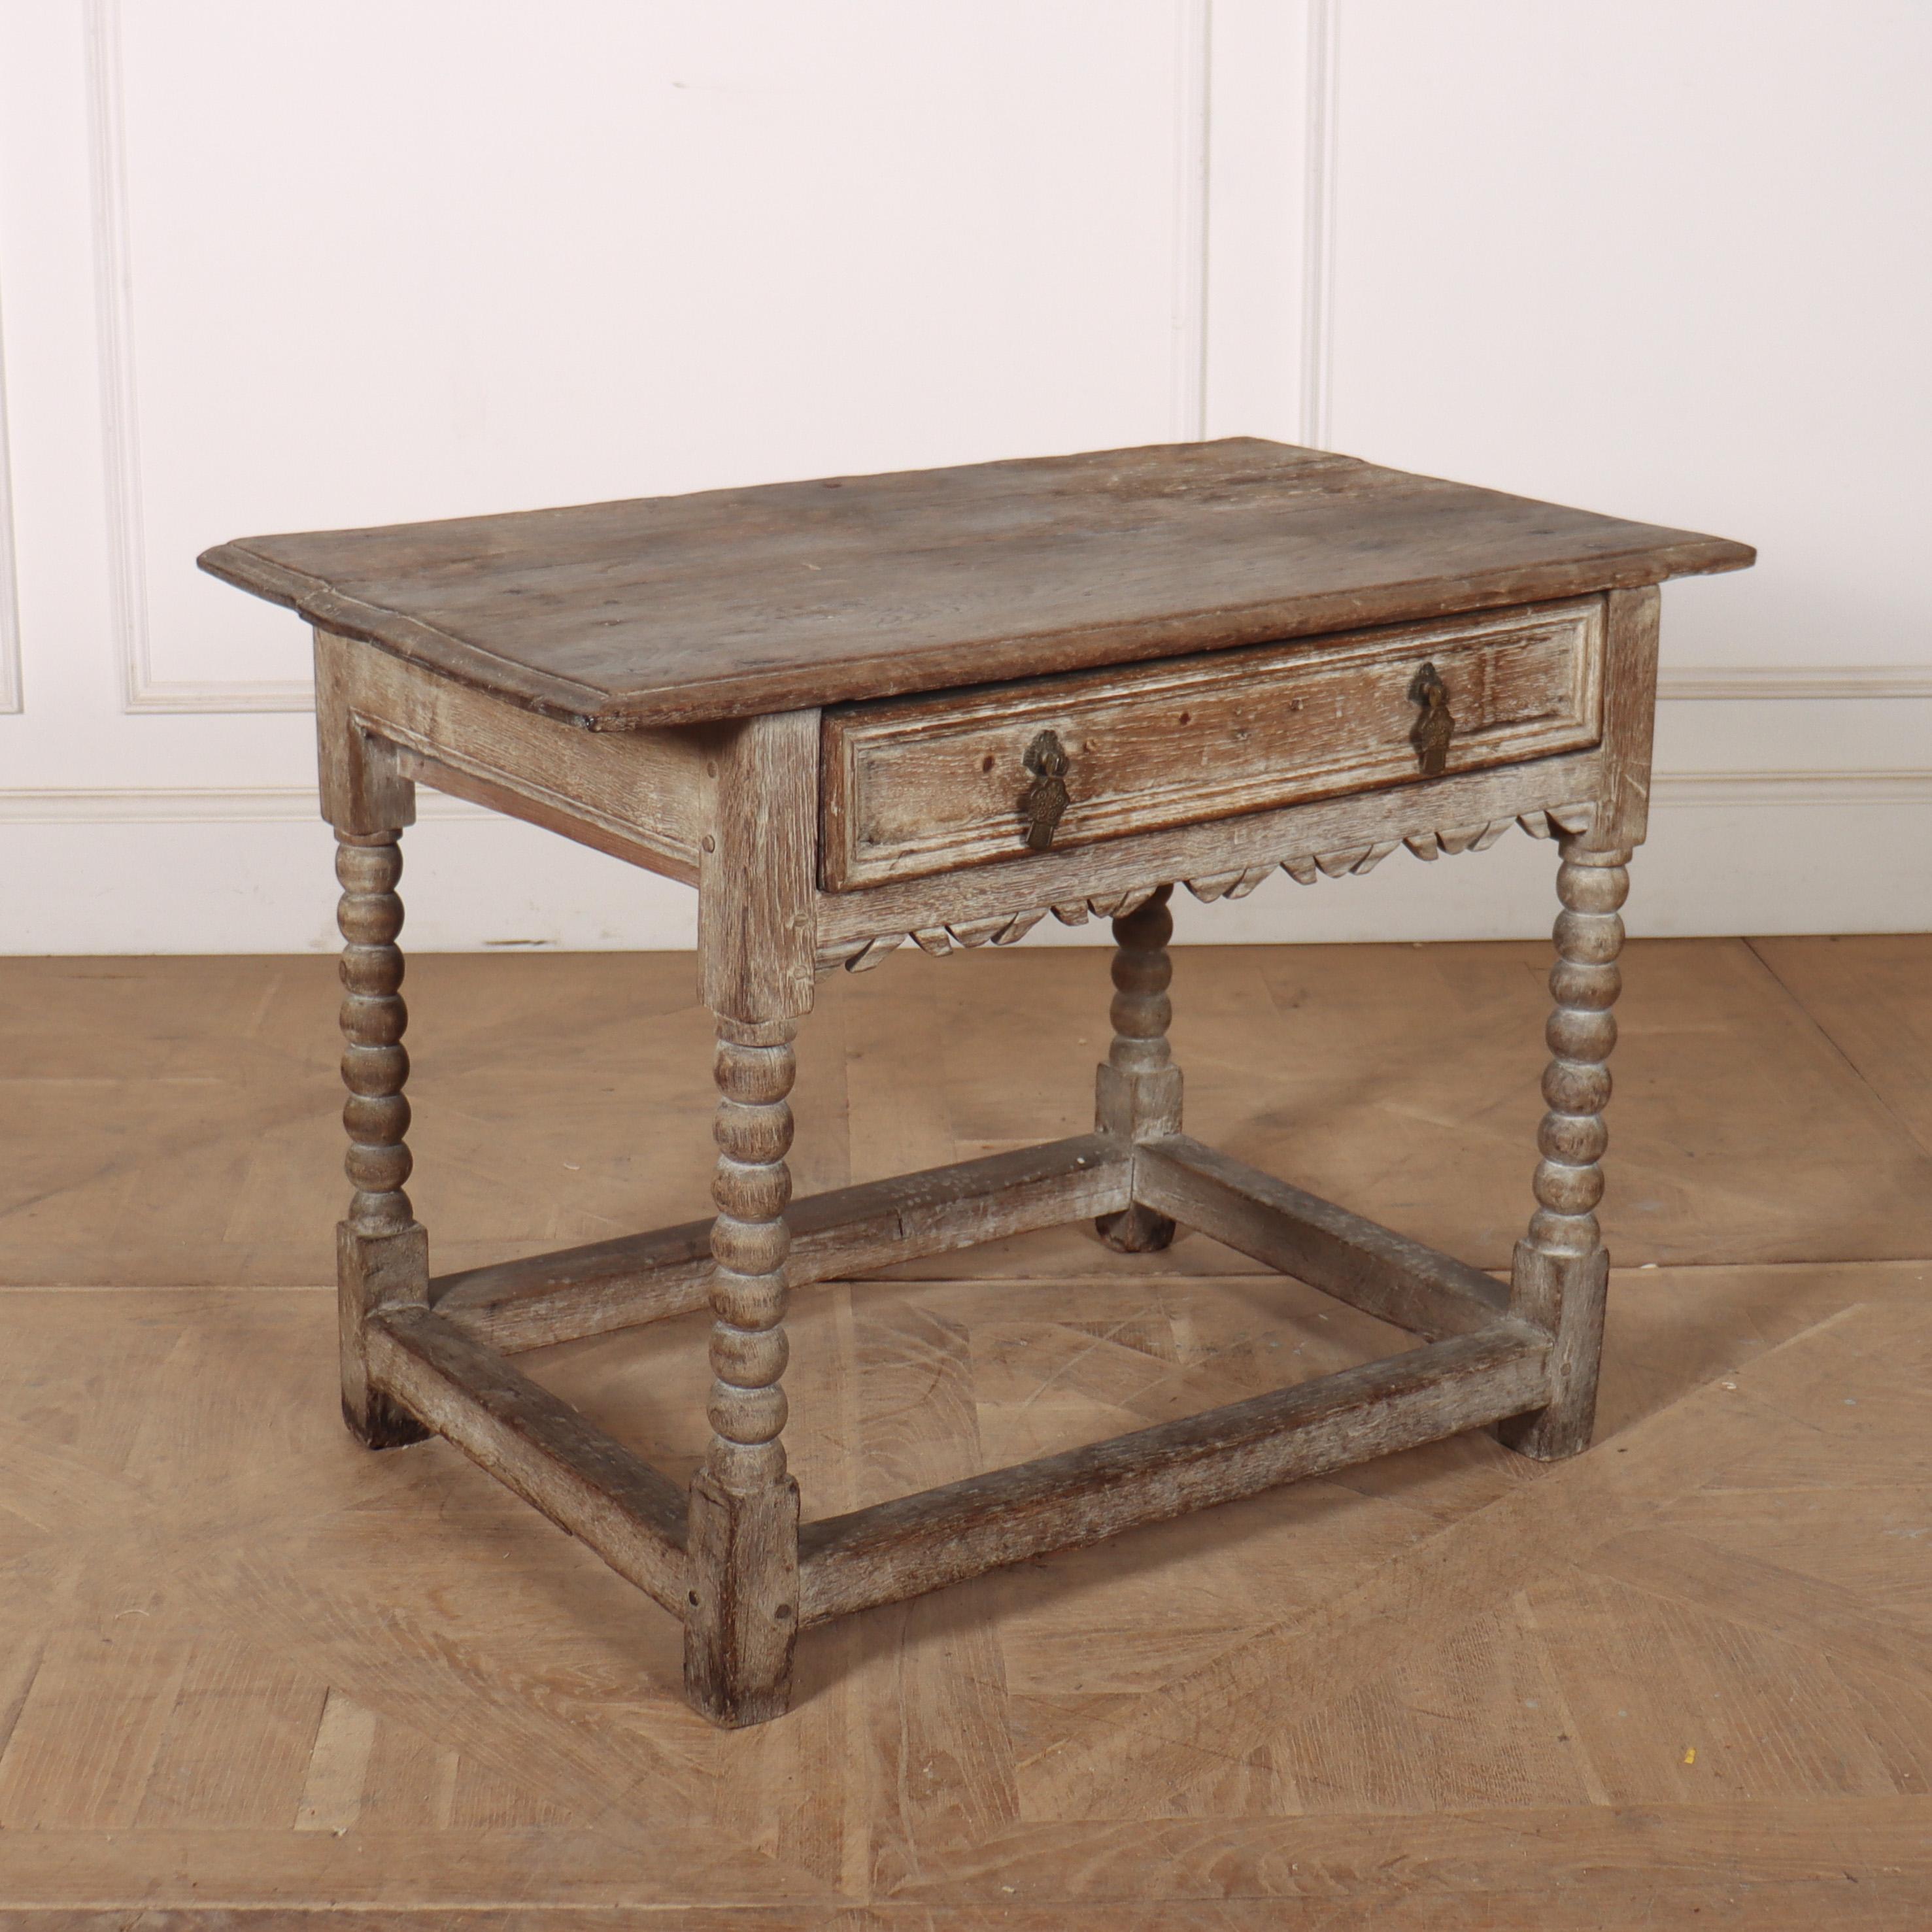 17th C English limed oak one drawer lamp / side table. 1690.

Reference: 8247

Dimensions
35.5 inches (90 cms) Wide
21 inches (53 cms) Deep
25 inches (64 cms) High